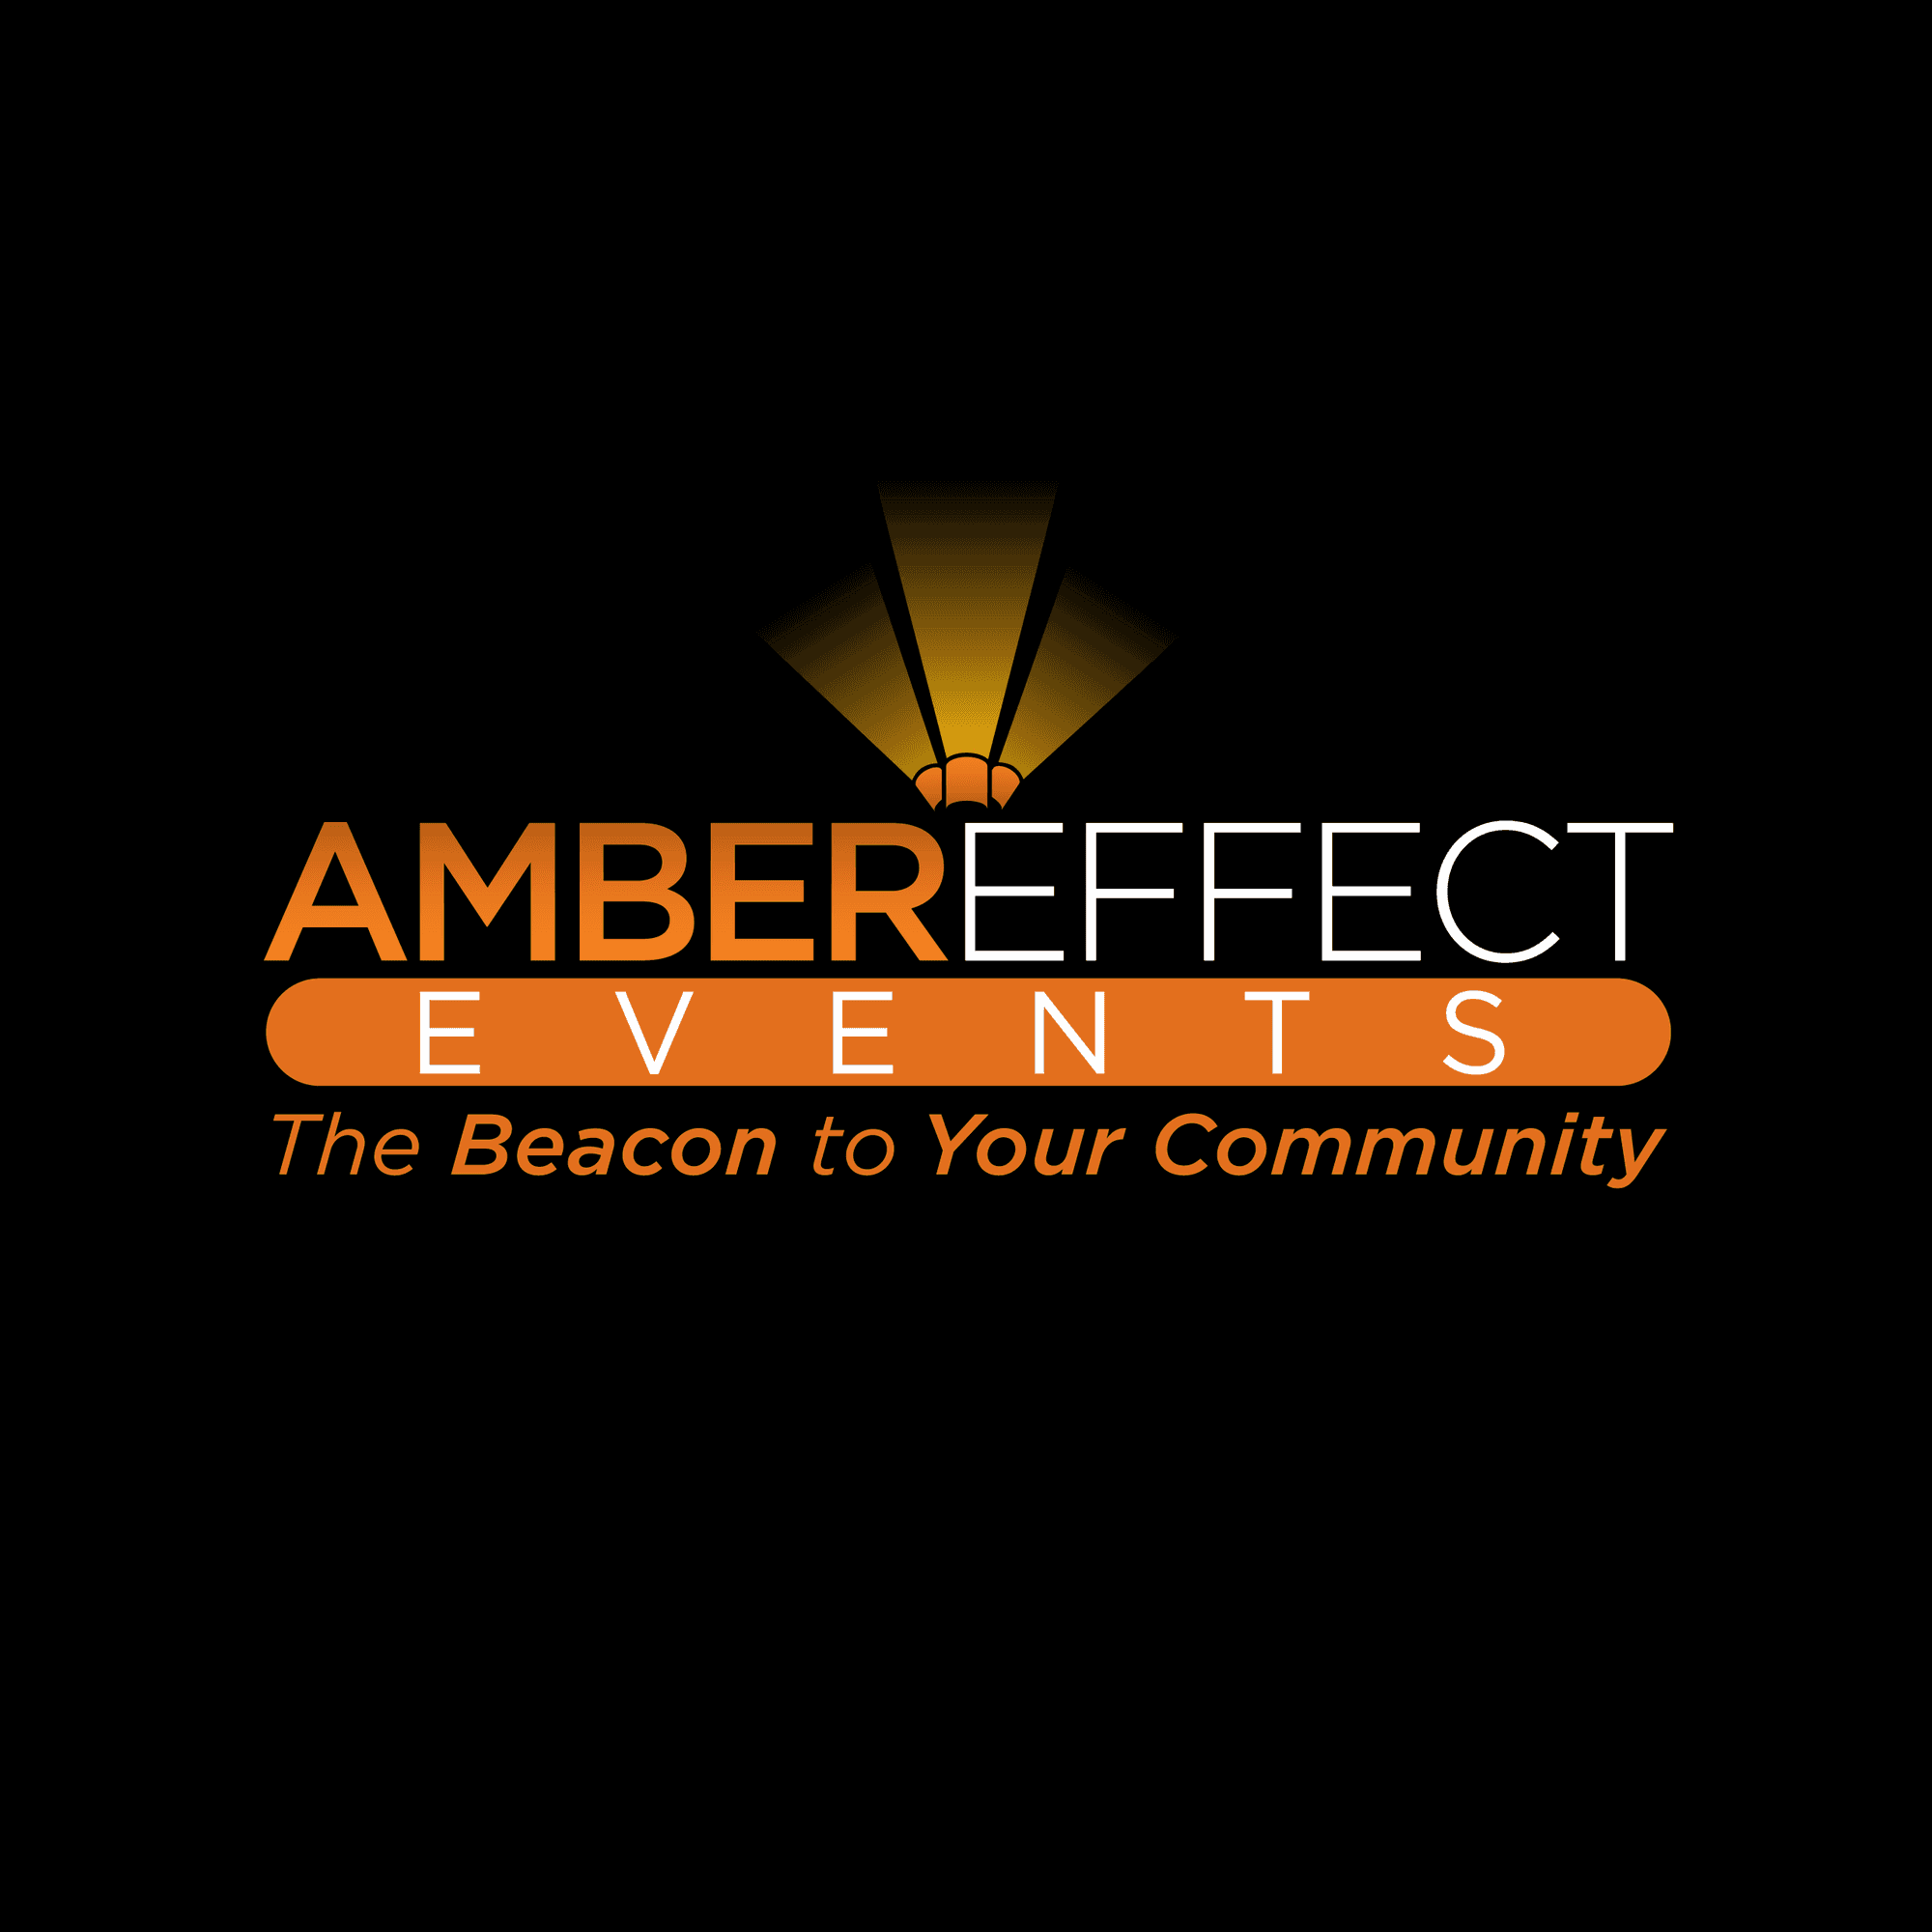 AMBER EFFECT EVENTS logo